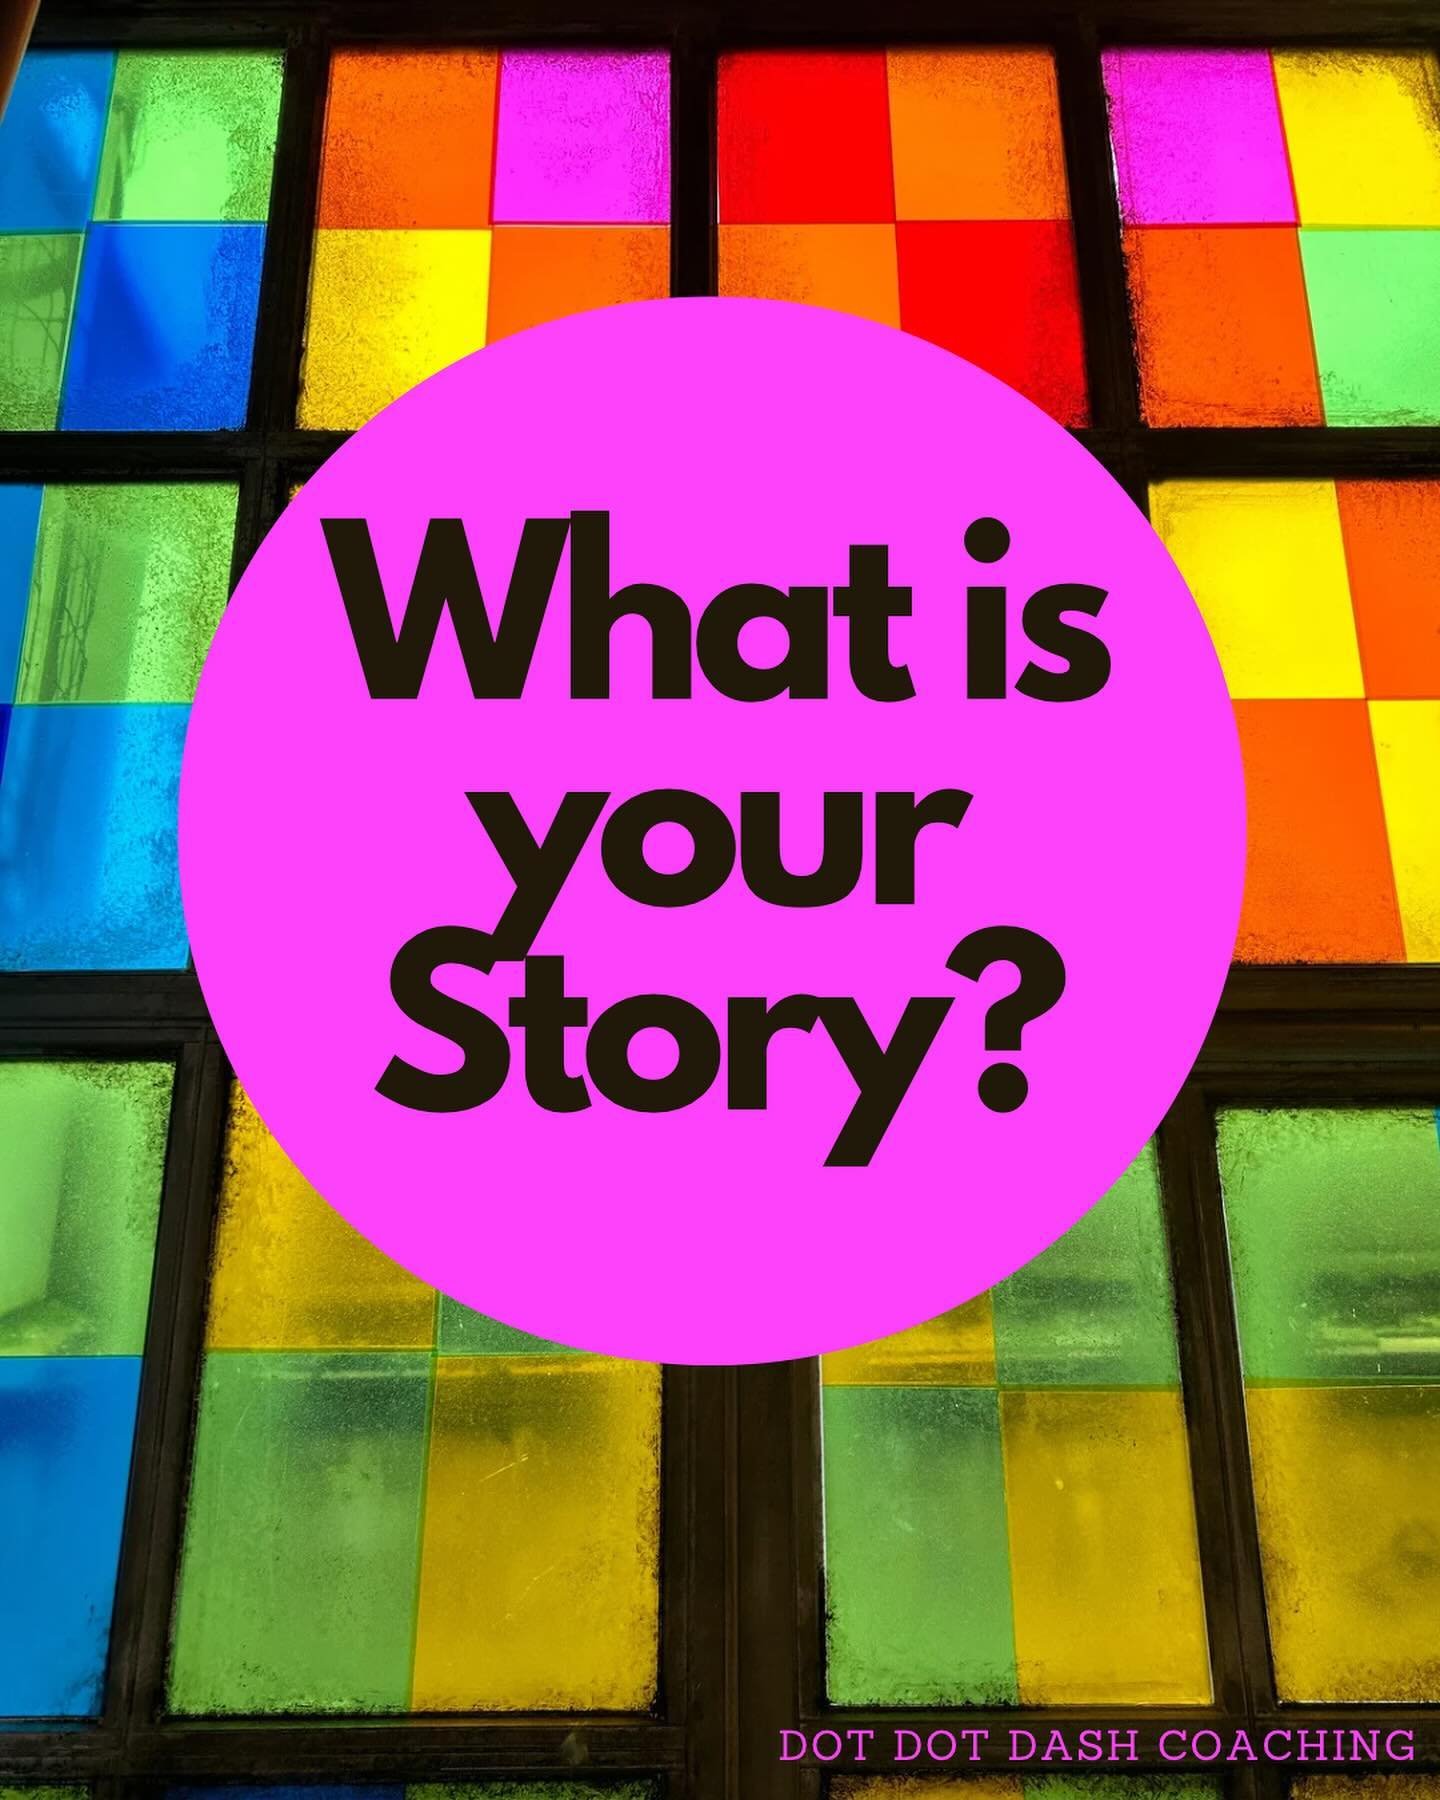 📕 What&rsquo;s your story?
&nbsp;
Can you say it in just 6 words? 🤔 #sixwordstory
&nbsp;
👉Gallery Geek Grows into Creative Coach.. that is one version of mine!
.
I am celebrating a fantastic week leading on an inspiring project which combines my l